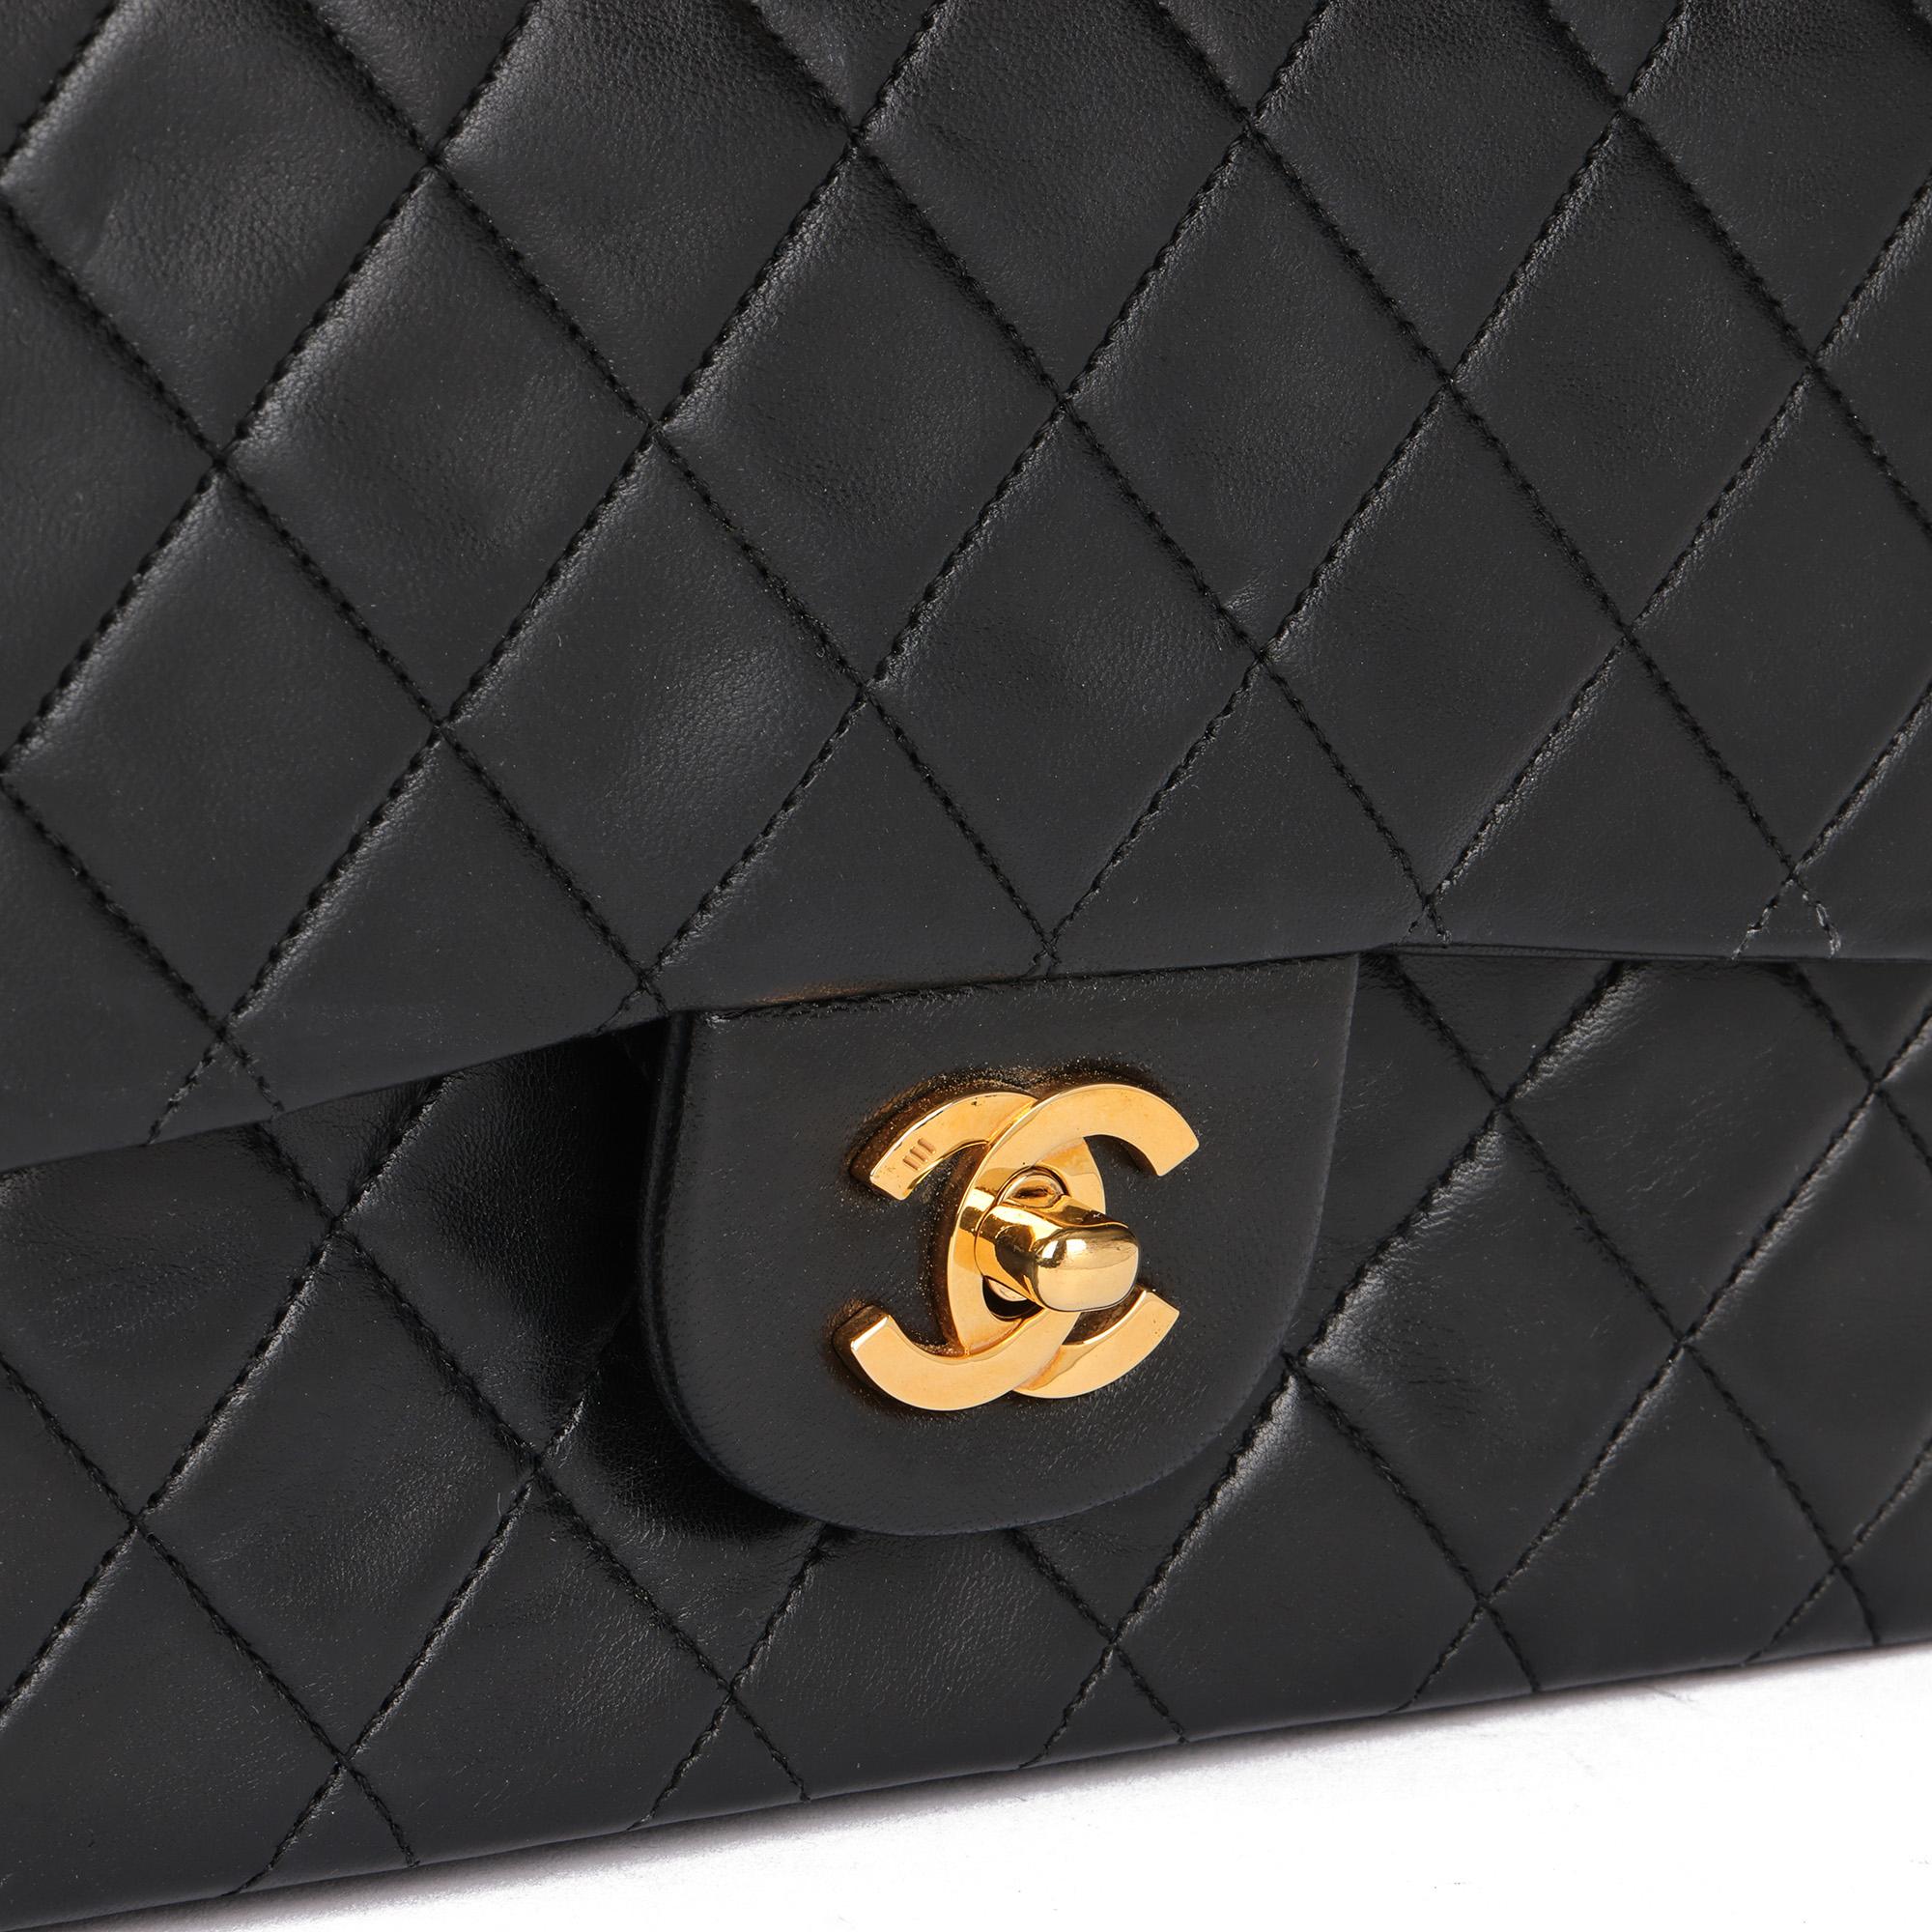 Chanel BLACK QUILTED LAMBSKIN VINTAGE MEDIUM CLASSIC DOUBLE FLAP BAG 2